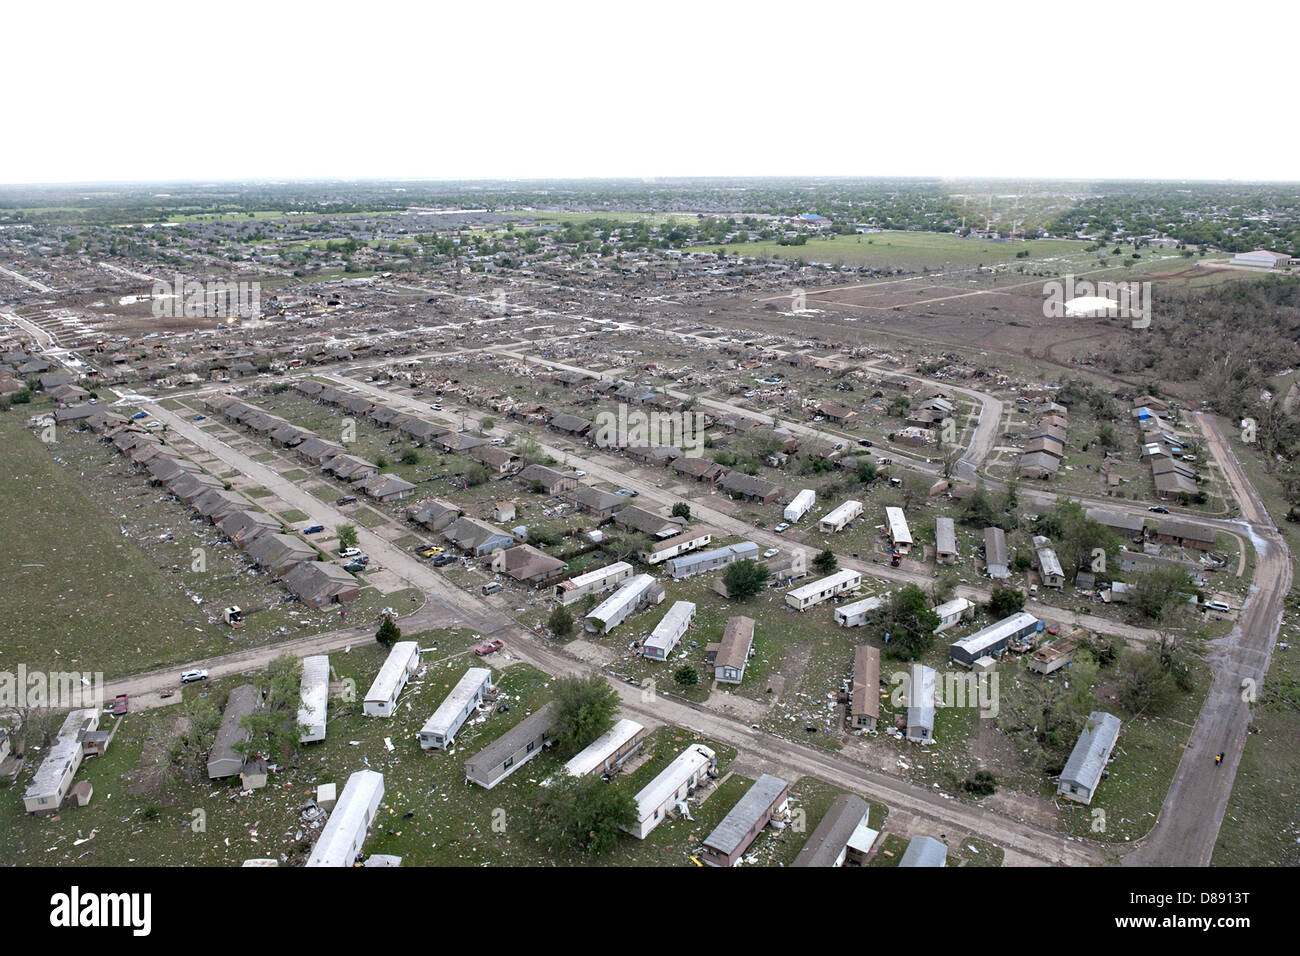 Aerial view of destruction from an EF-5 tornado May 21, 2013 in Moore, Oklahoma. The massive storm with winds exceeding 200 miles per hour tore through the Oklahoma City suburb May 20, 2013, killing at least 24 people, injuring more than 230 and displacing thousands. Stock Photo